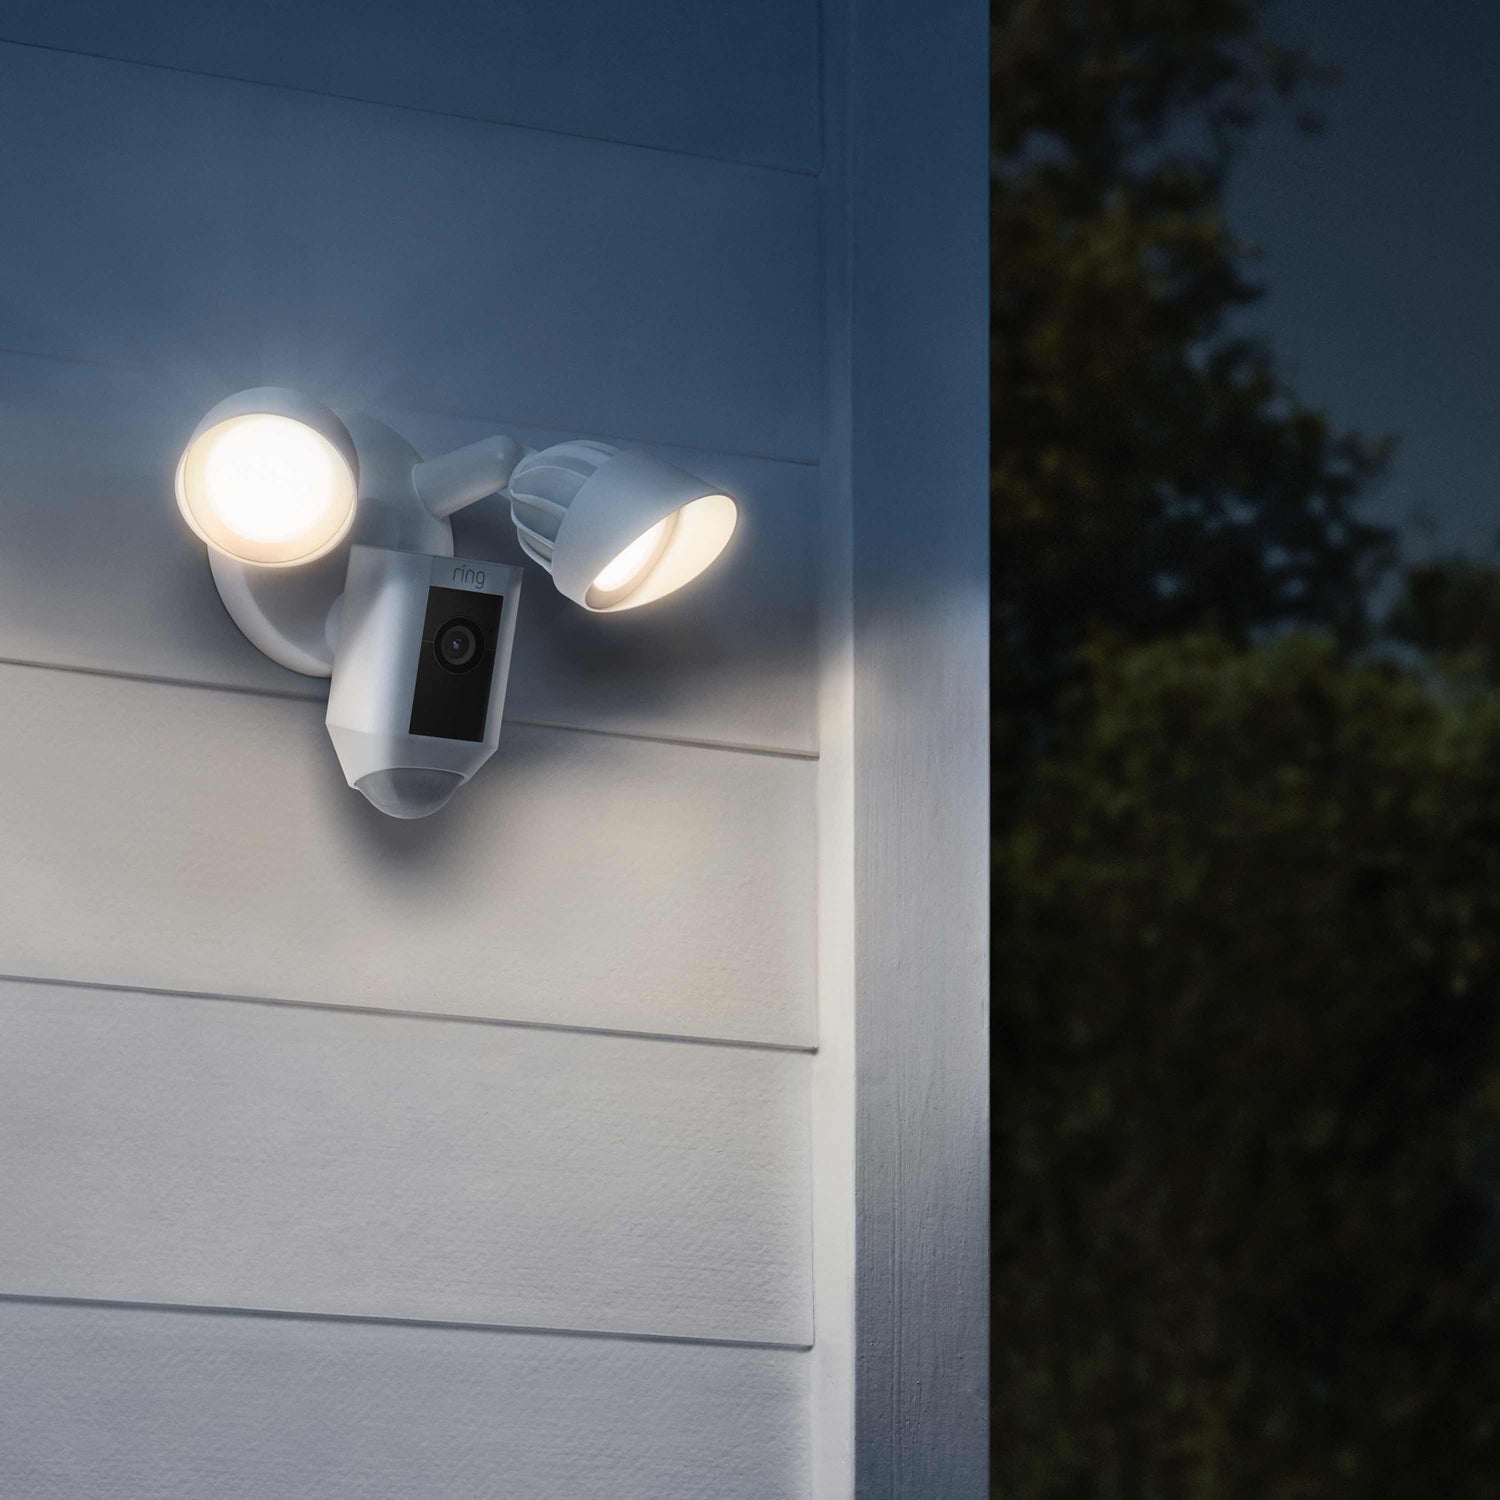 Floodlight Cam Wired Plus (Certified Refurbished) - Outdoors at night, an illuminated Floodlight Cam Wired Plus in white is mounted to an exterior wall of home near the corner.